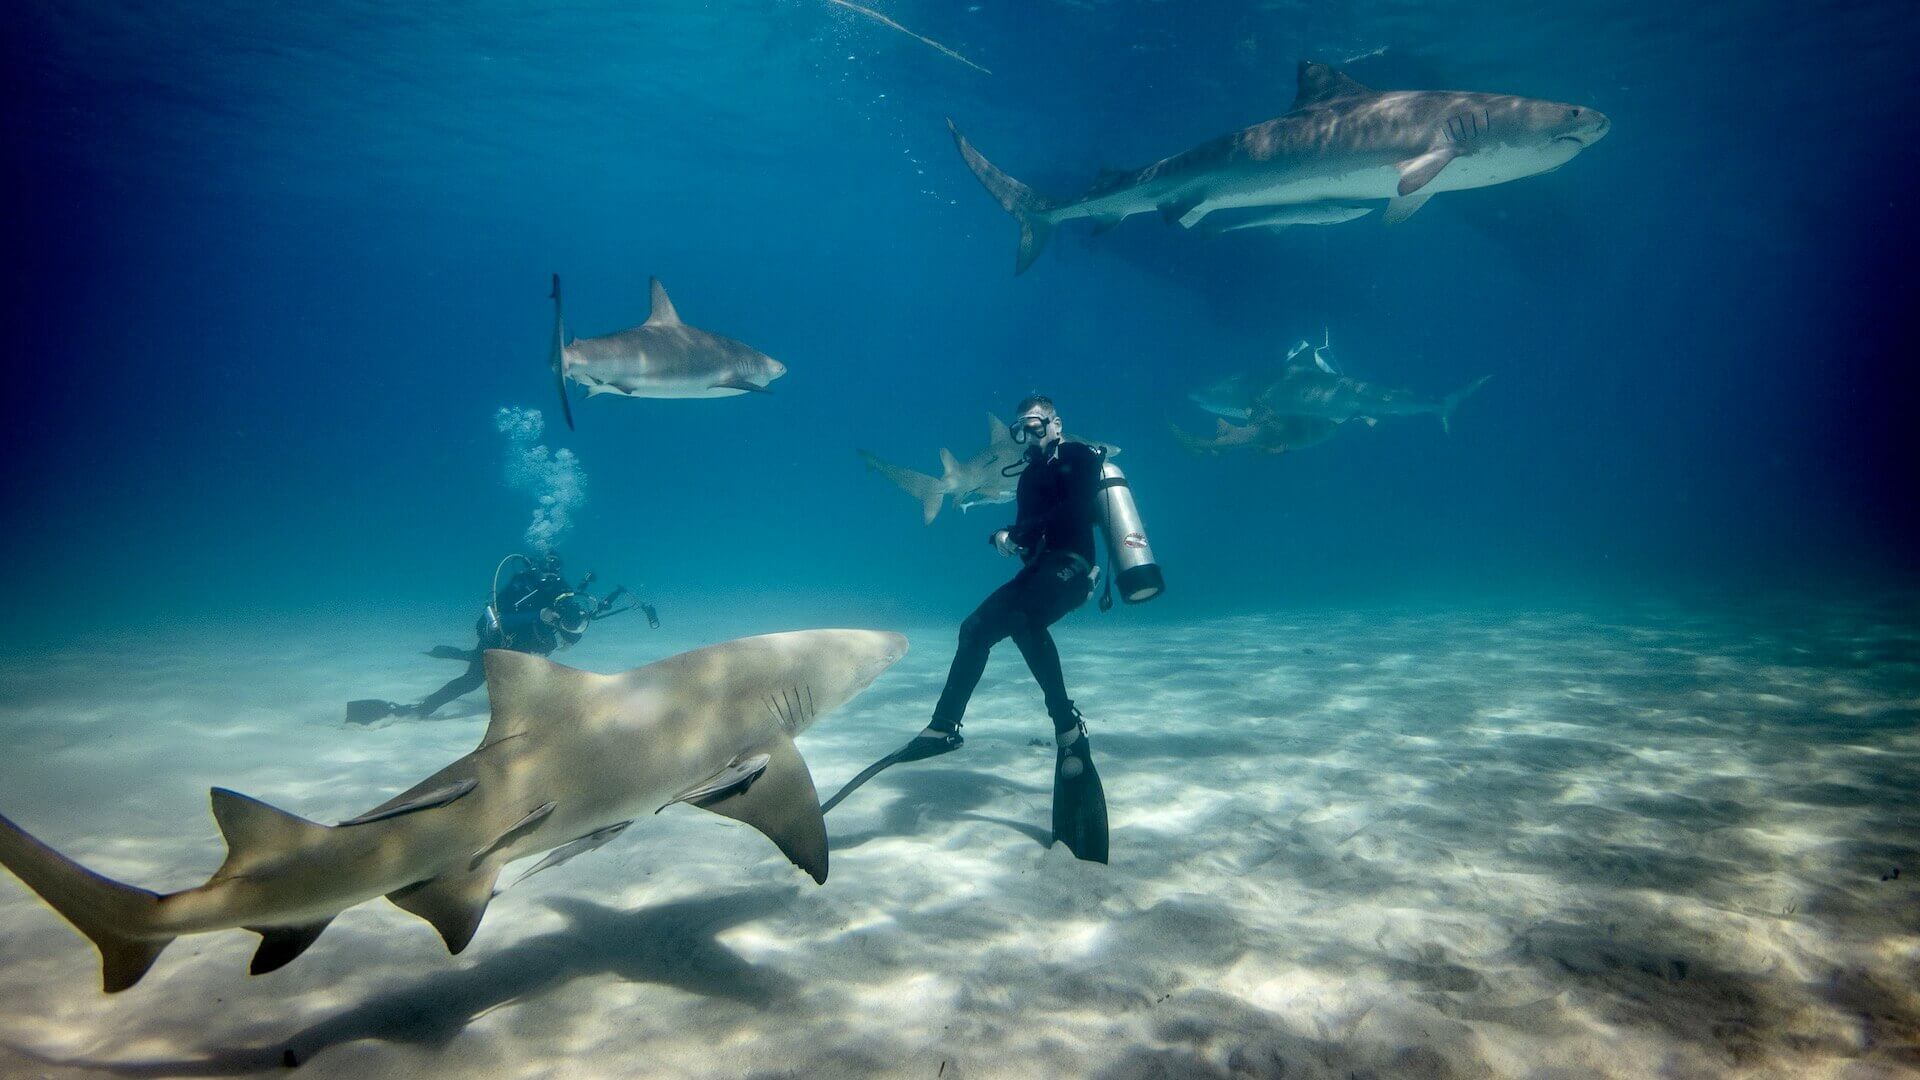 swimming with sharks is one of the travel experiences of a lifetime